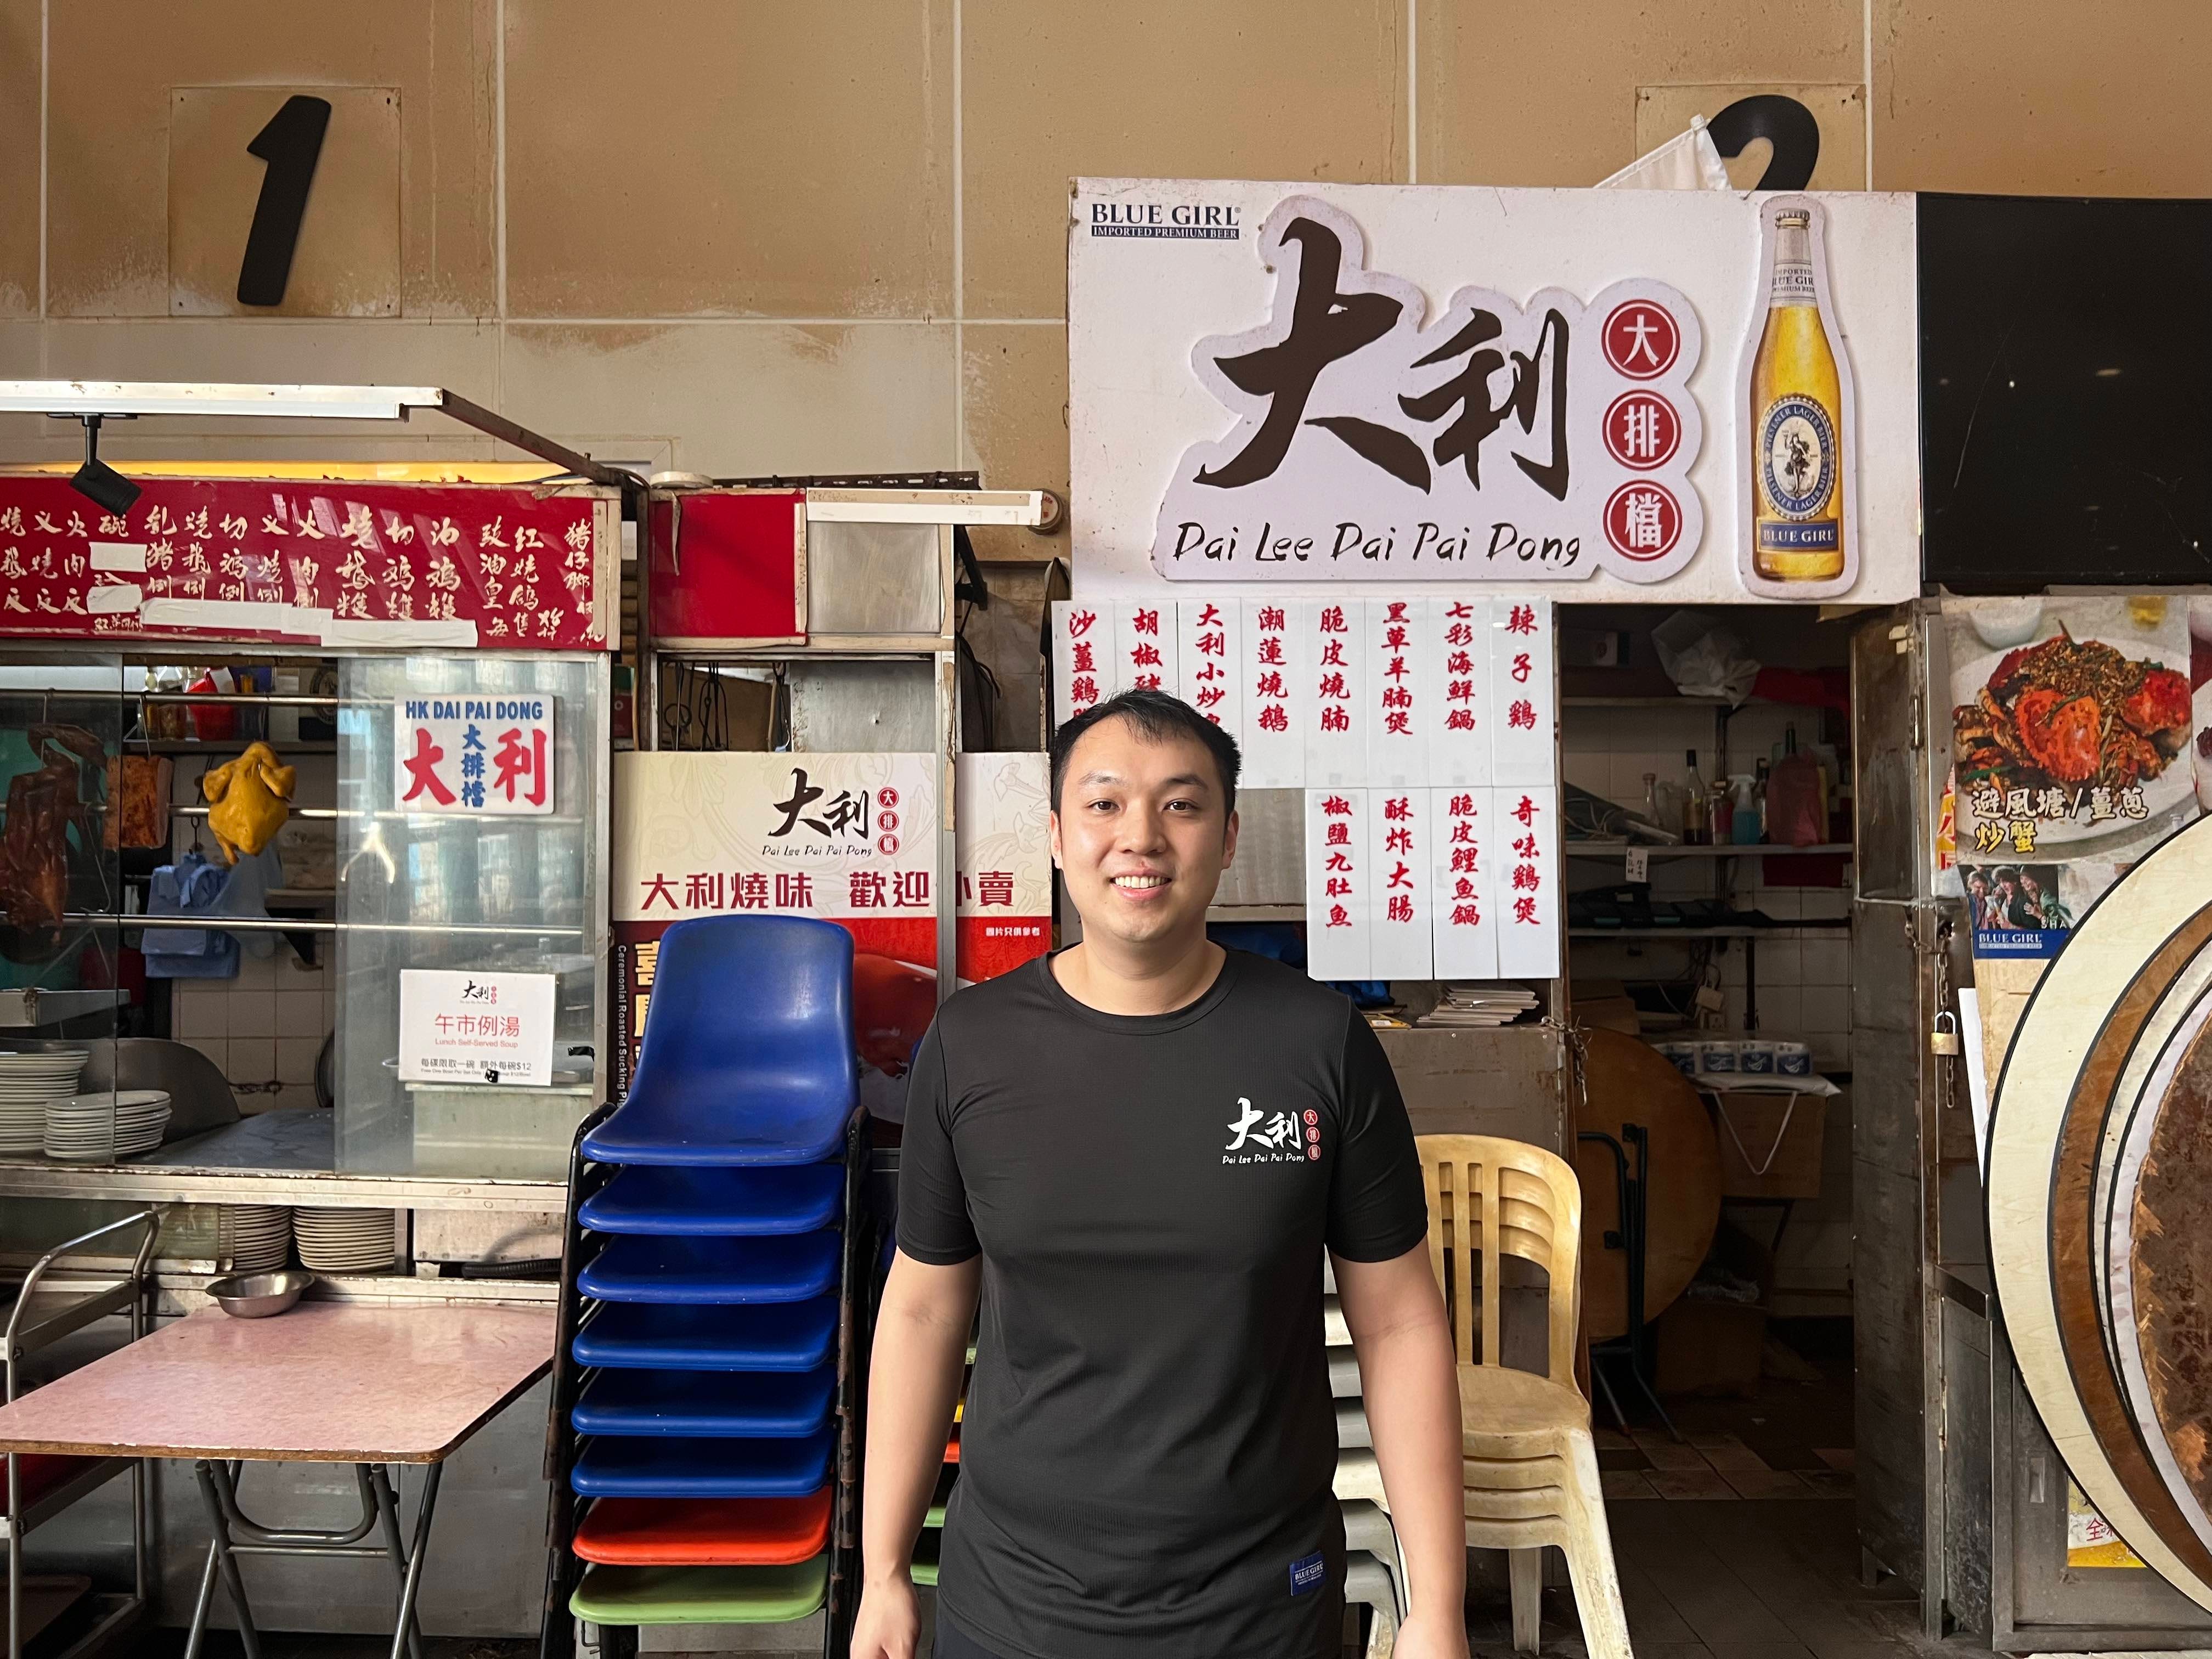 He left his desk job in the US to run a food stall in Hong Kong. He earns more now — but plans to walk away from it soon.